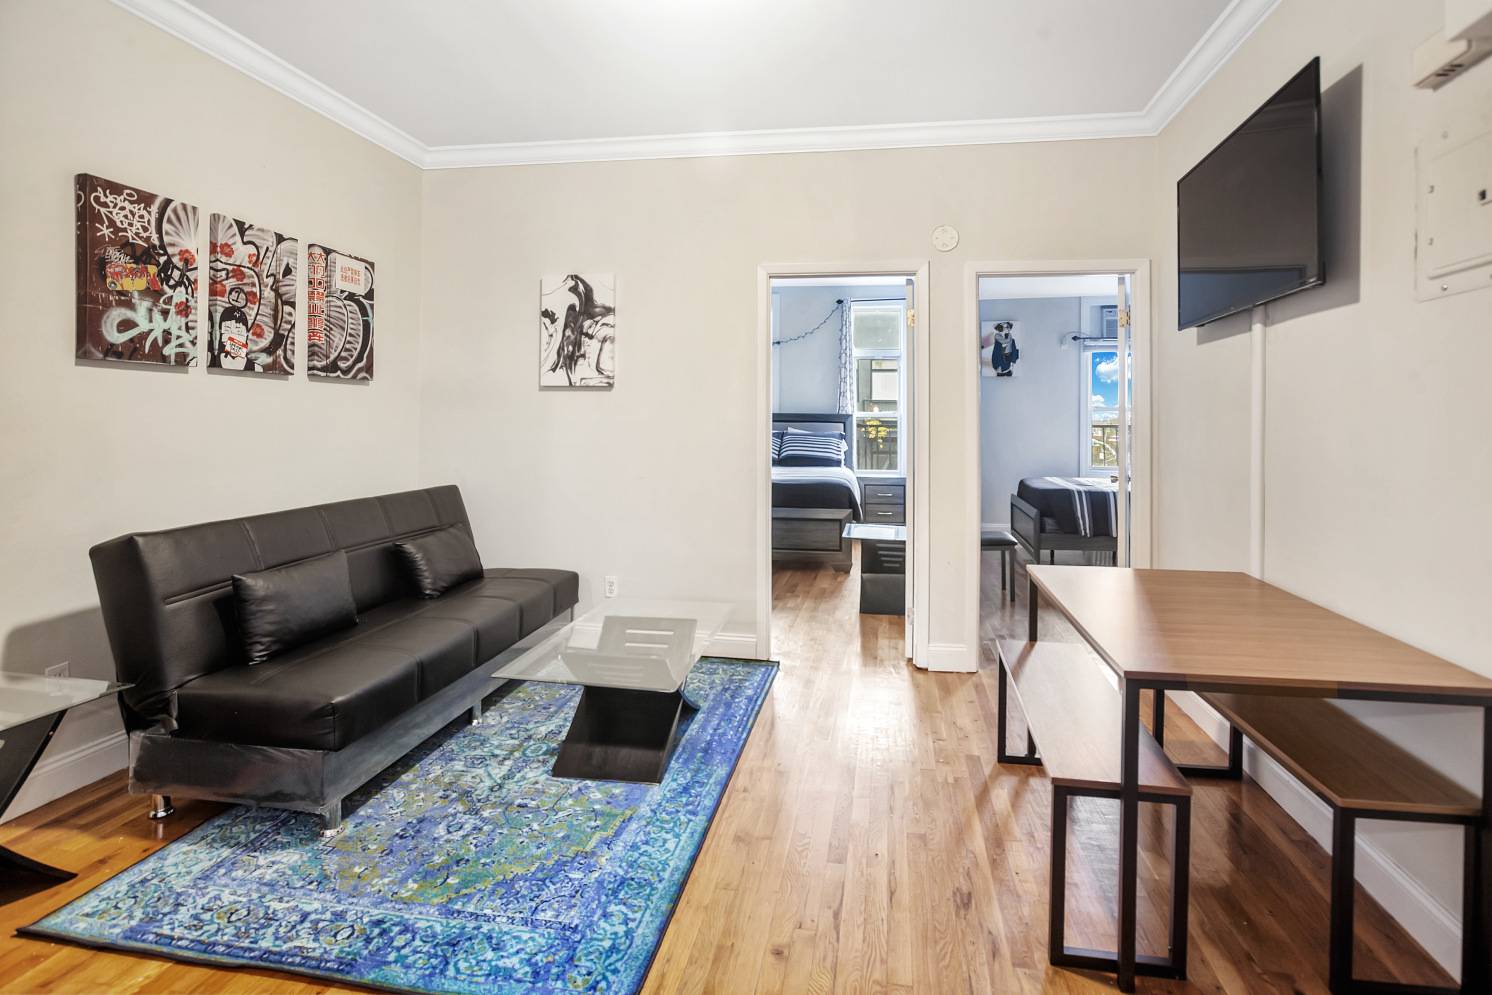 If you have been searching for larger bedrooms and living space in Williamsburg that is affordable, this apartment is the perfect fit.